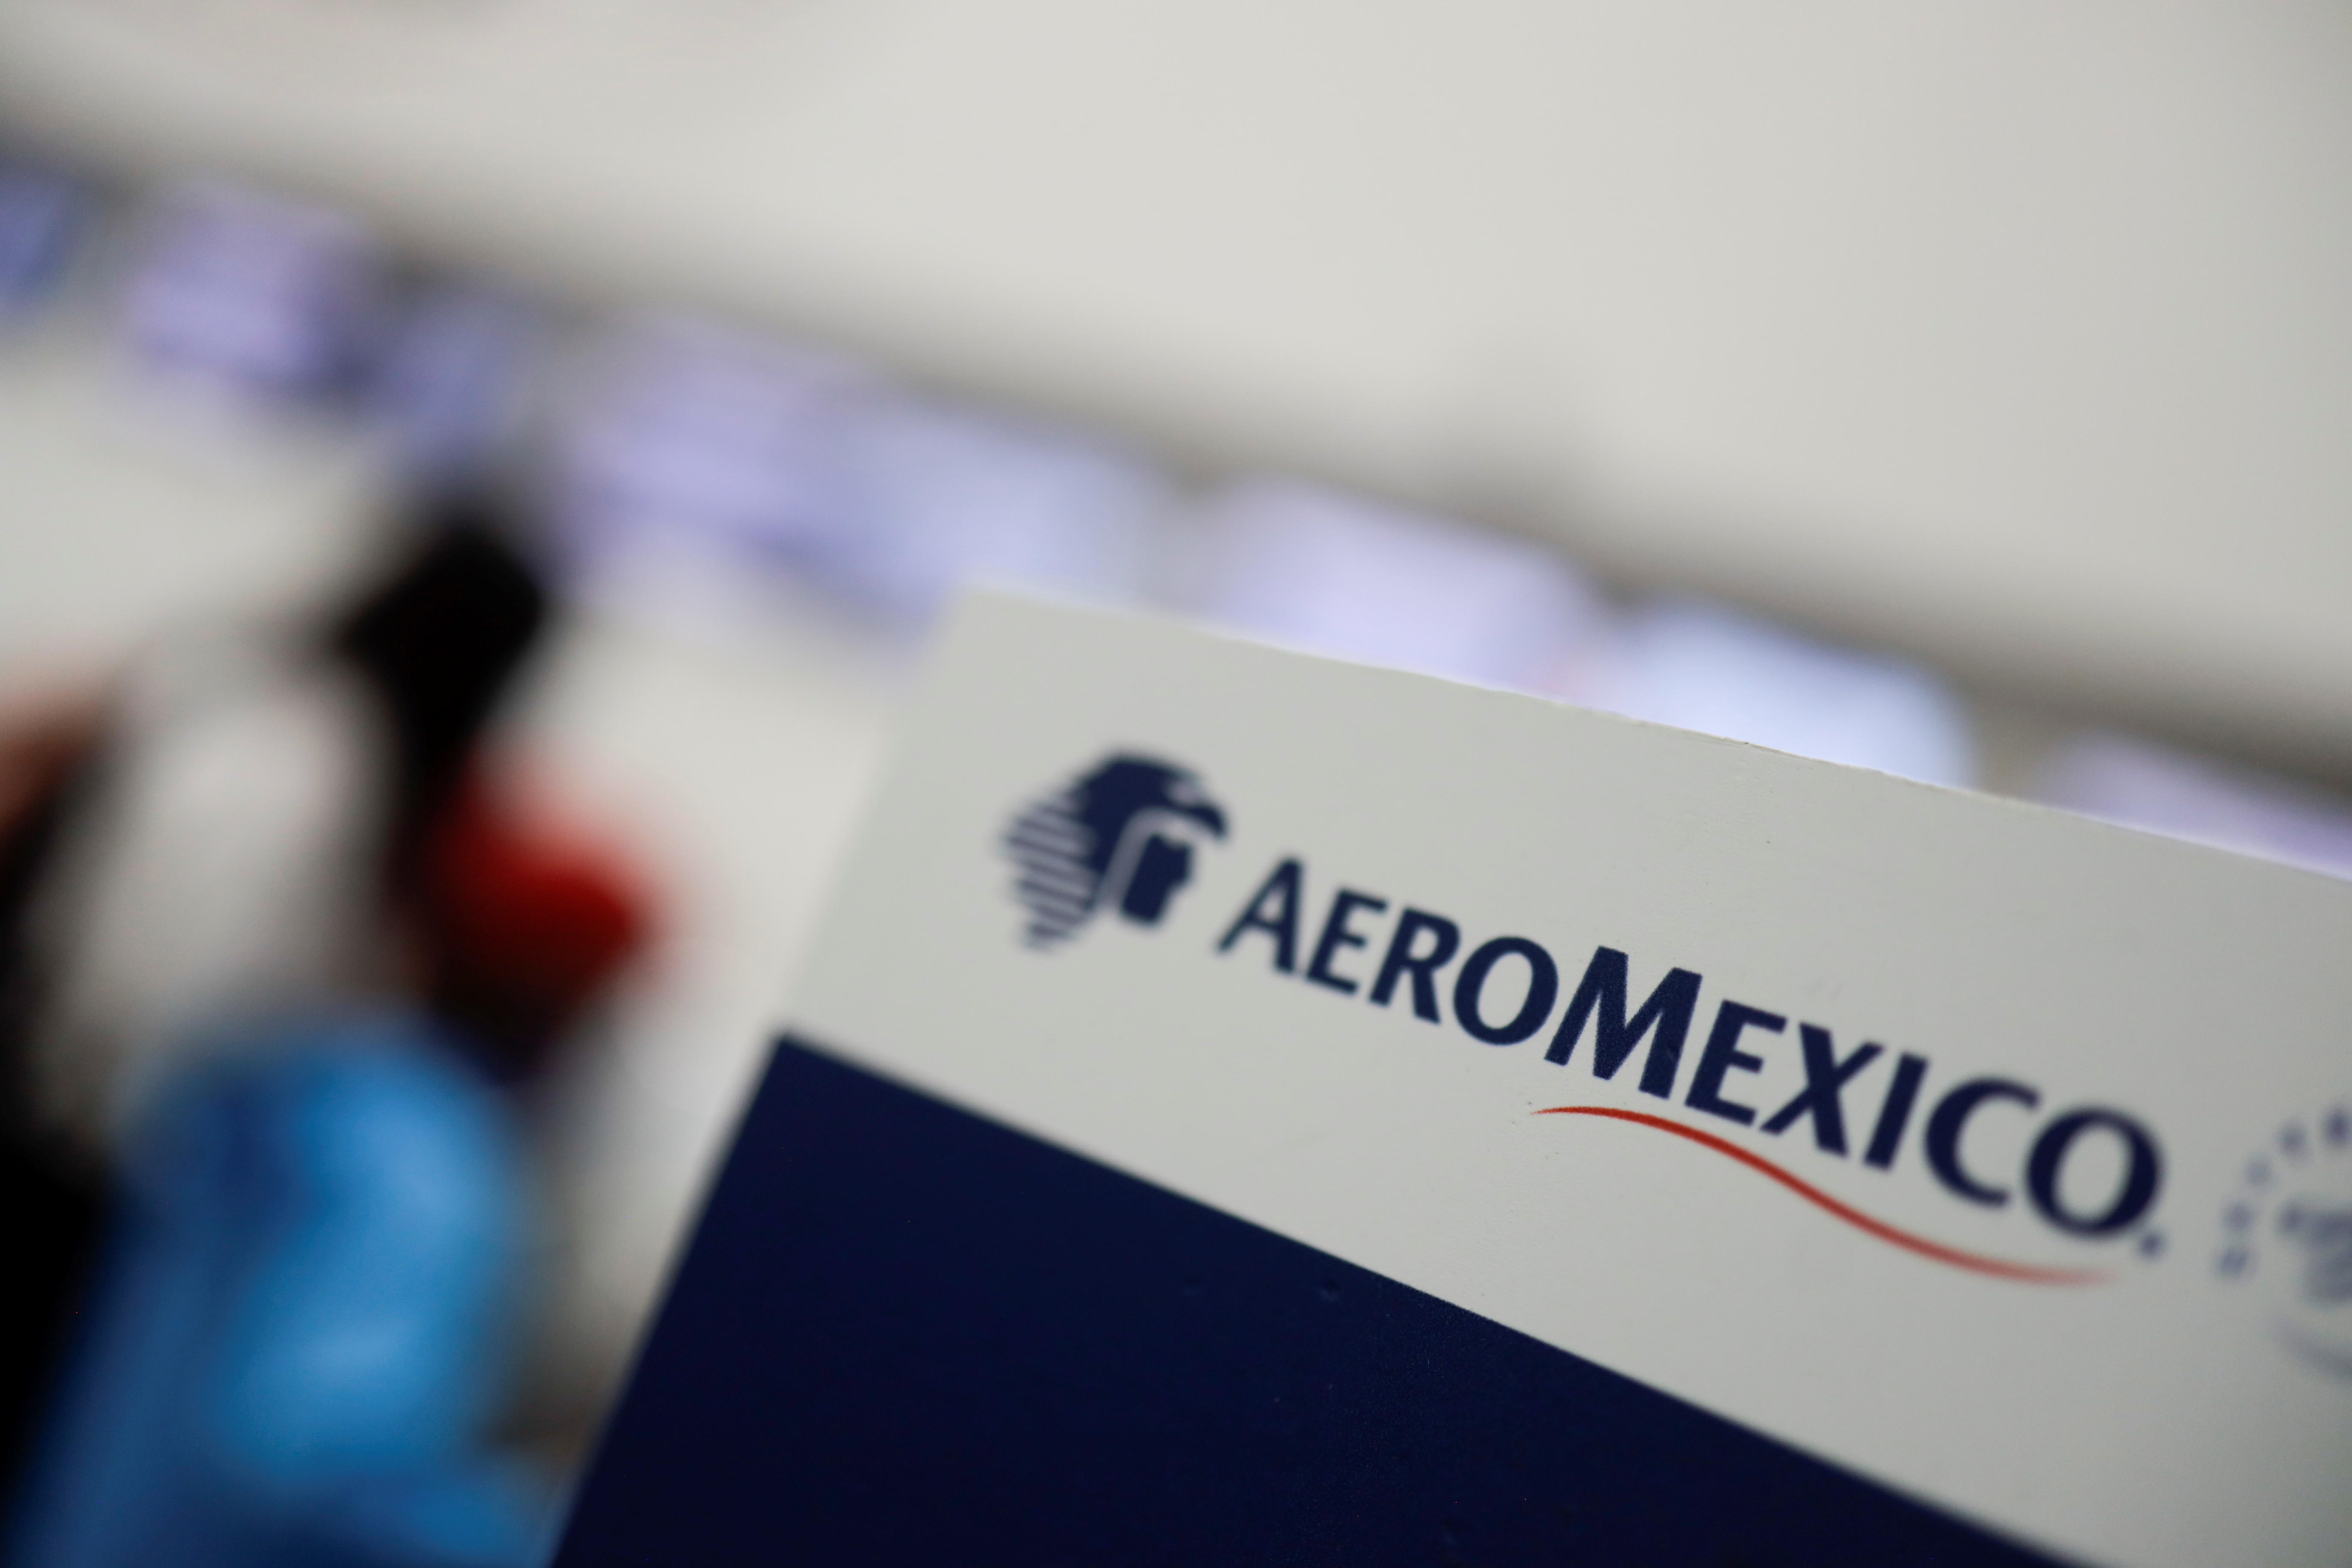 The logo of Mexican airline Aeromexico is pictured on a sign at the Benito Juarez International airport in Mexico City